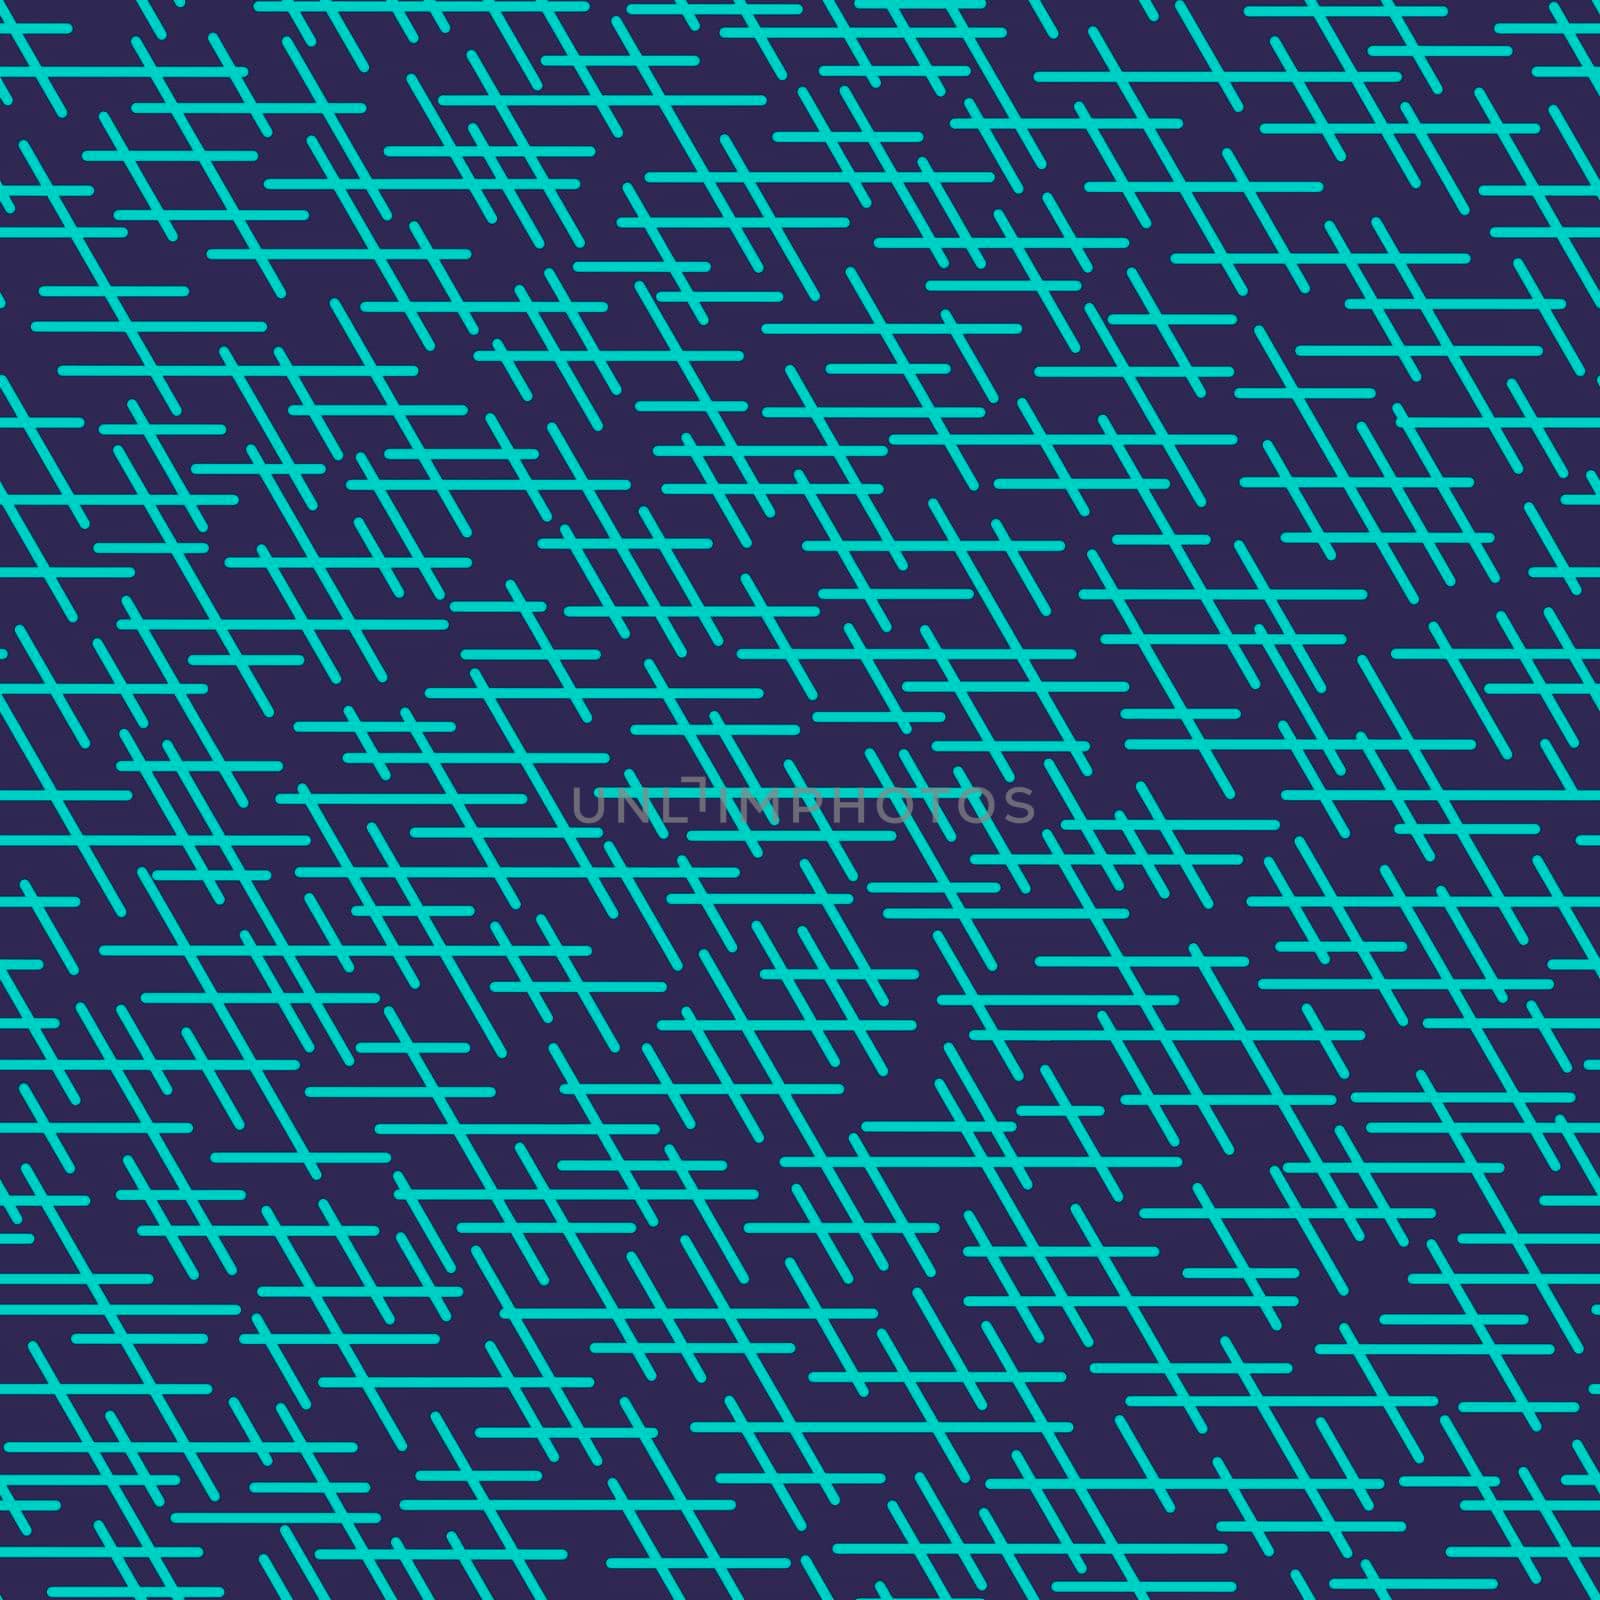 Randomly crossing lines making pattern.Chaotic short lines seamless pattern,chips and sticks modern repeatable motif.Good for print, textile,fabric, background, wrapping paper.Aquamarine blue colors by Angelsmoon